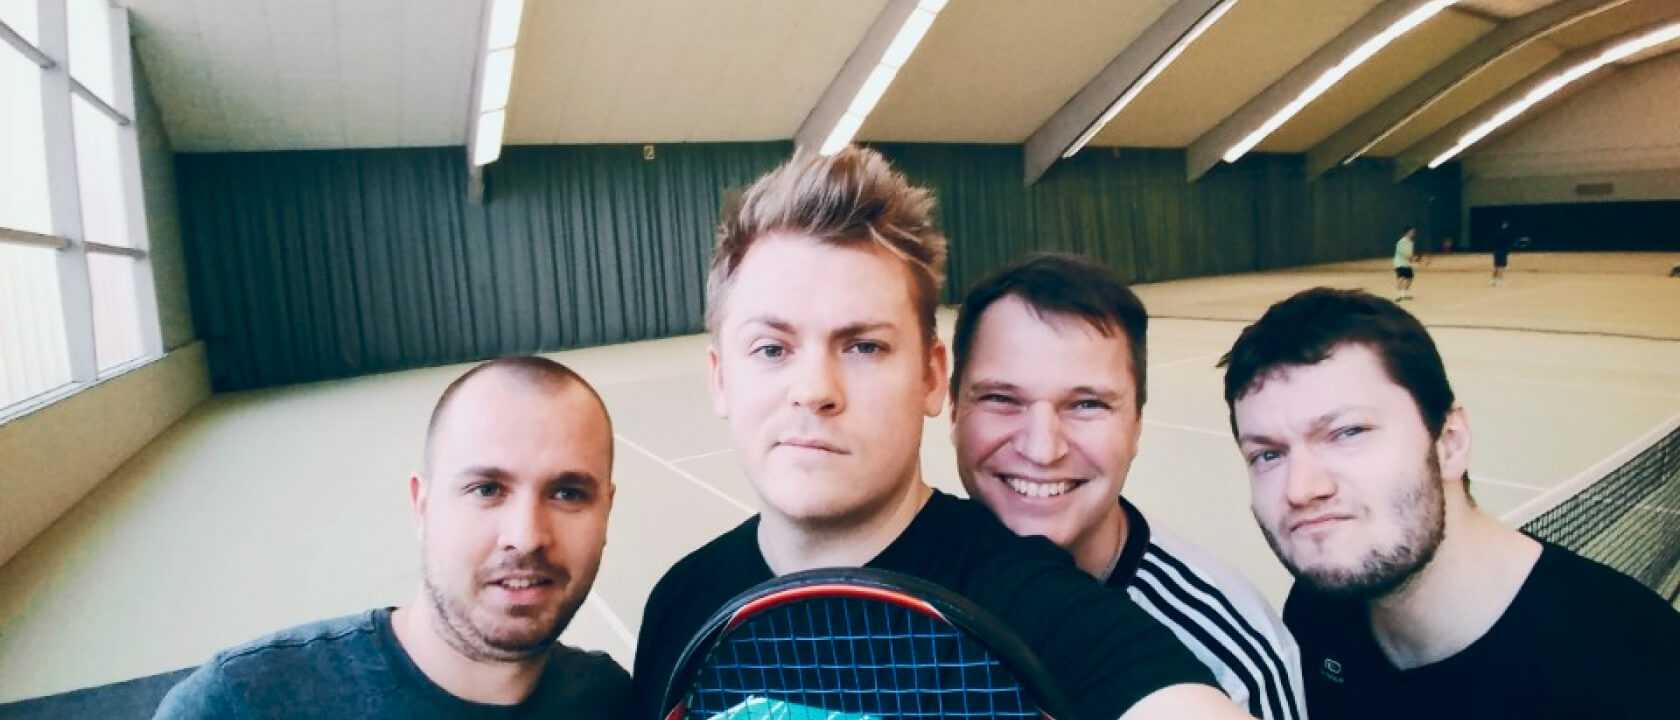 happy and a bit silly posing of the rentware team at an indoor tennis court